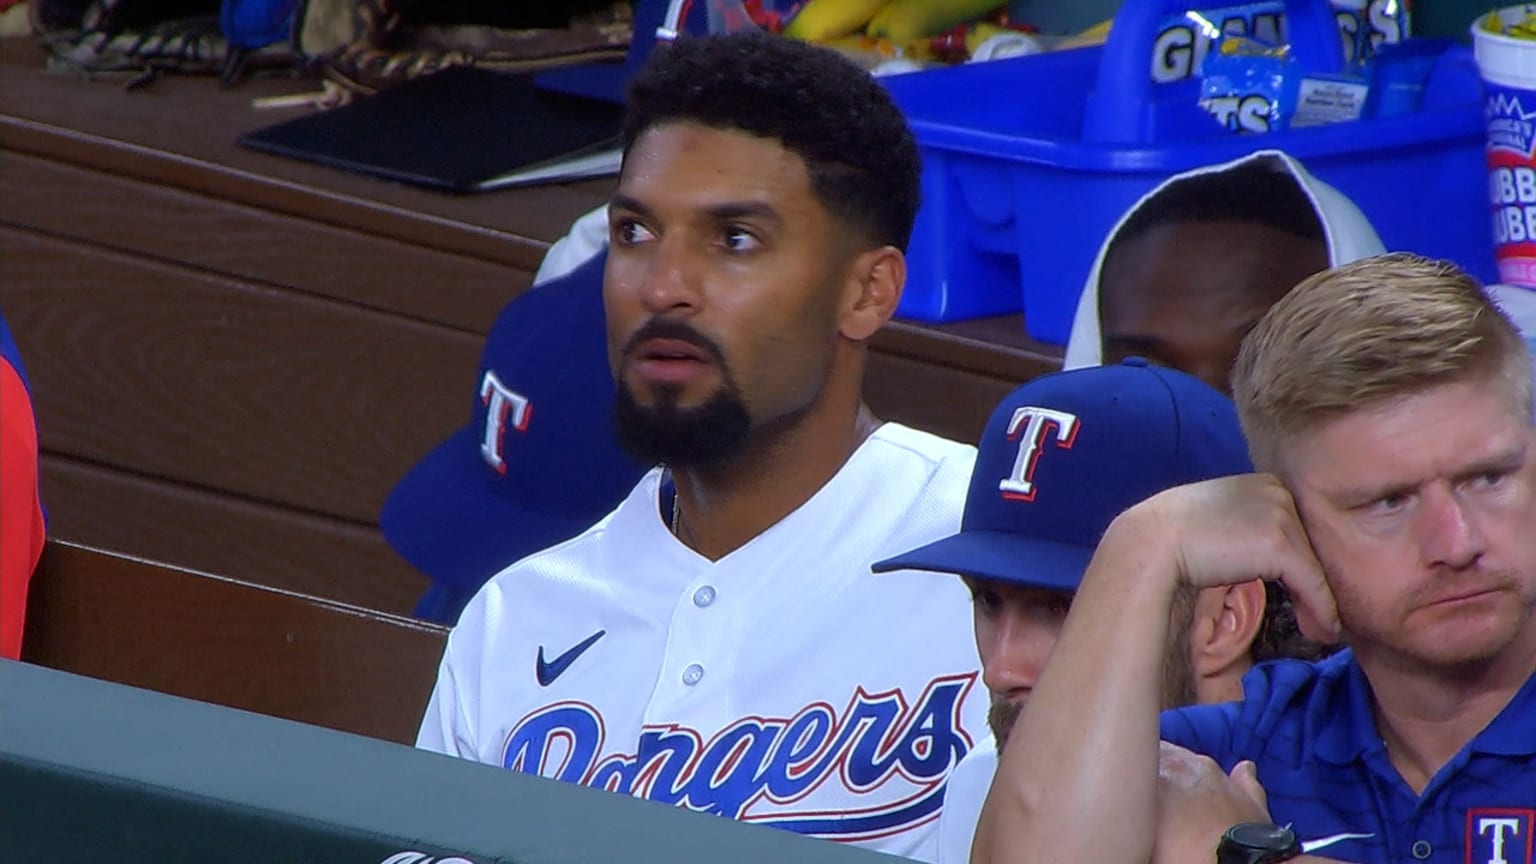 Marcus Semien sits on the dugout bench just before realizing he has to bat